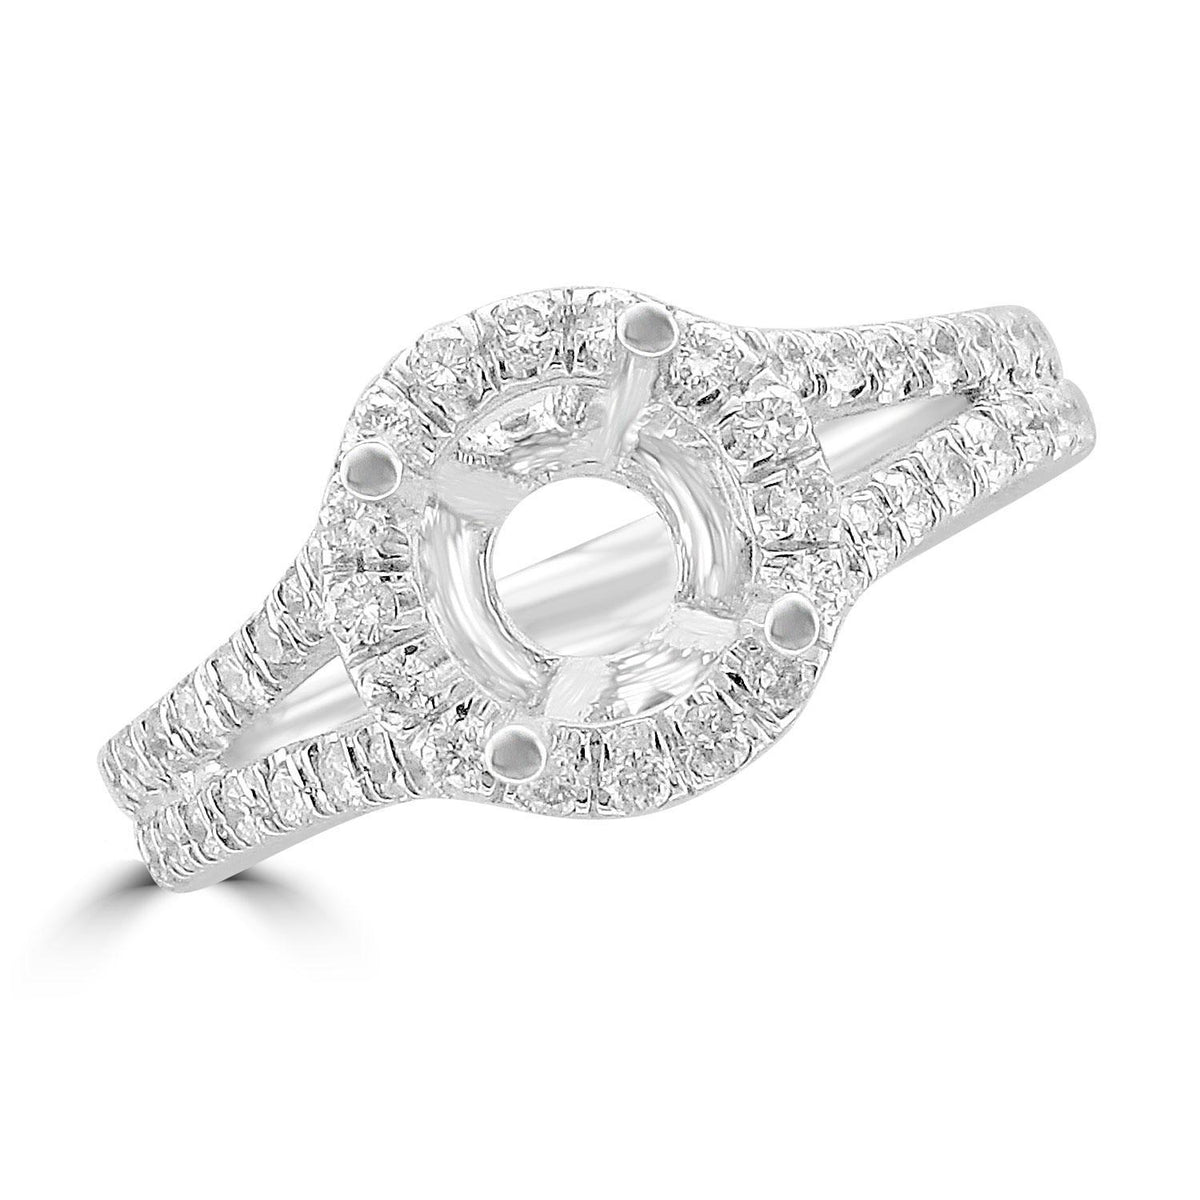 18KT White Gold 2/3 CTW Diamond Halo Setting for 1 CT Round 4,4.5,5,5.5,6,6.5,7,7.5,8,8.5,9